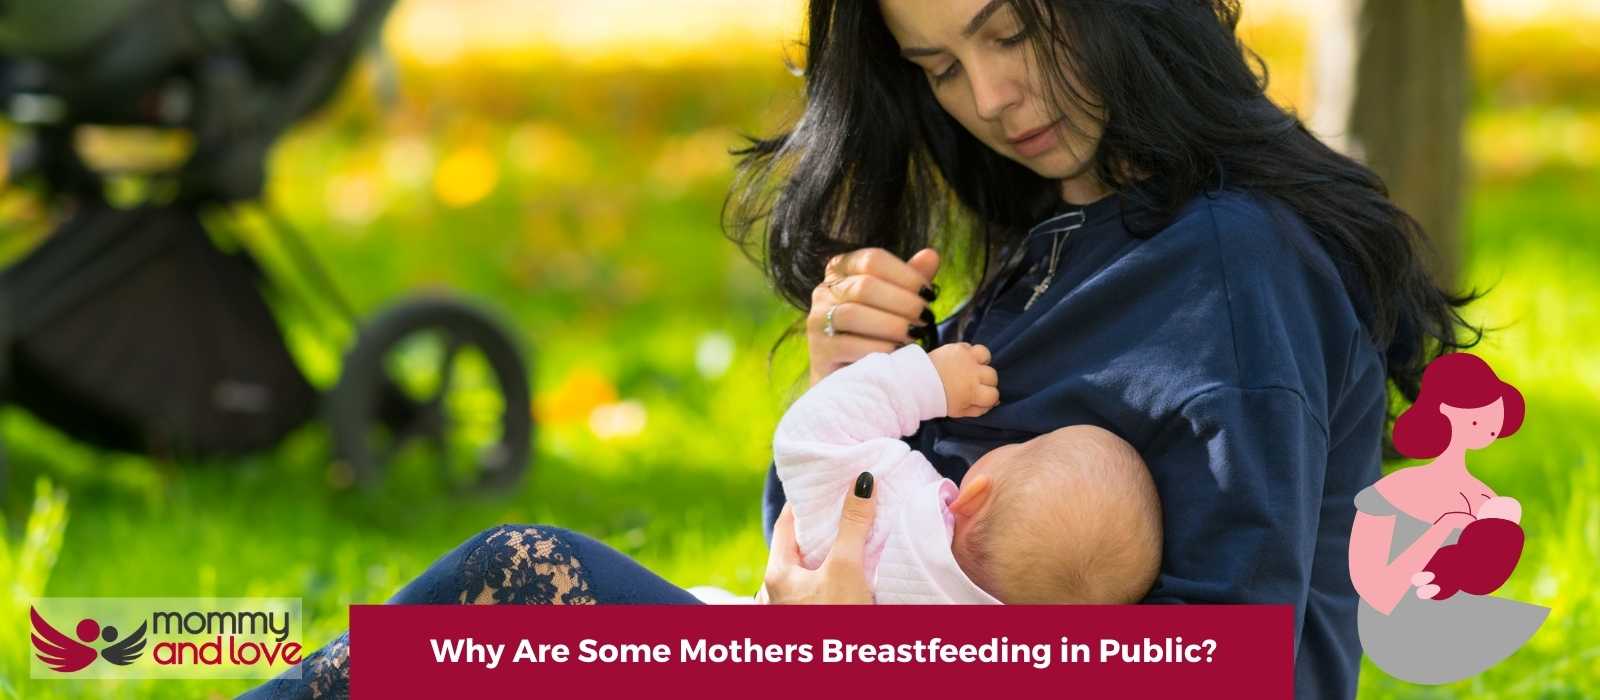 Why Are Some Mothers Breastfeeding in Public